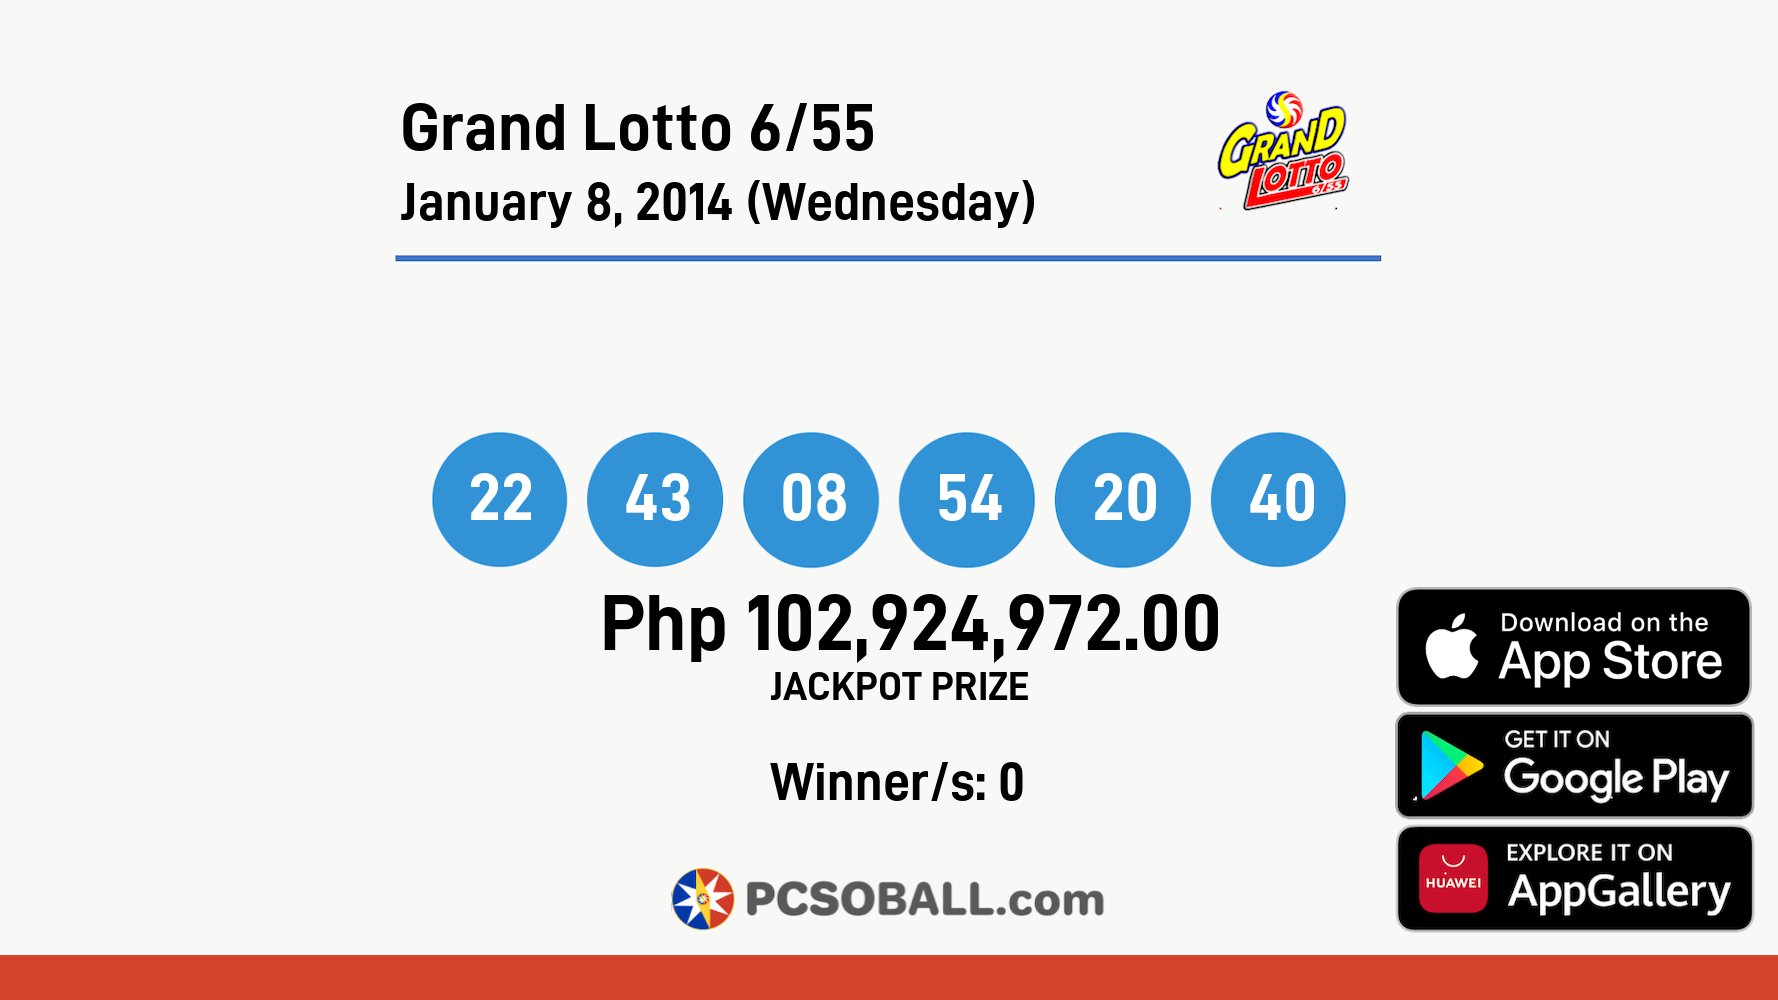 Grand Lotto 6/55 January 8, 2014 (Wednesday) Result